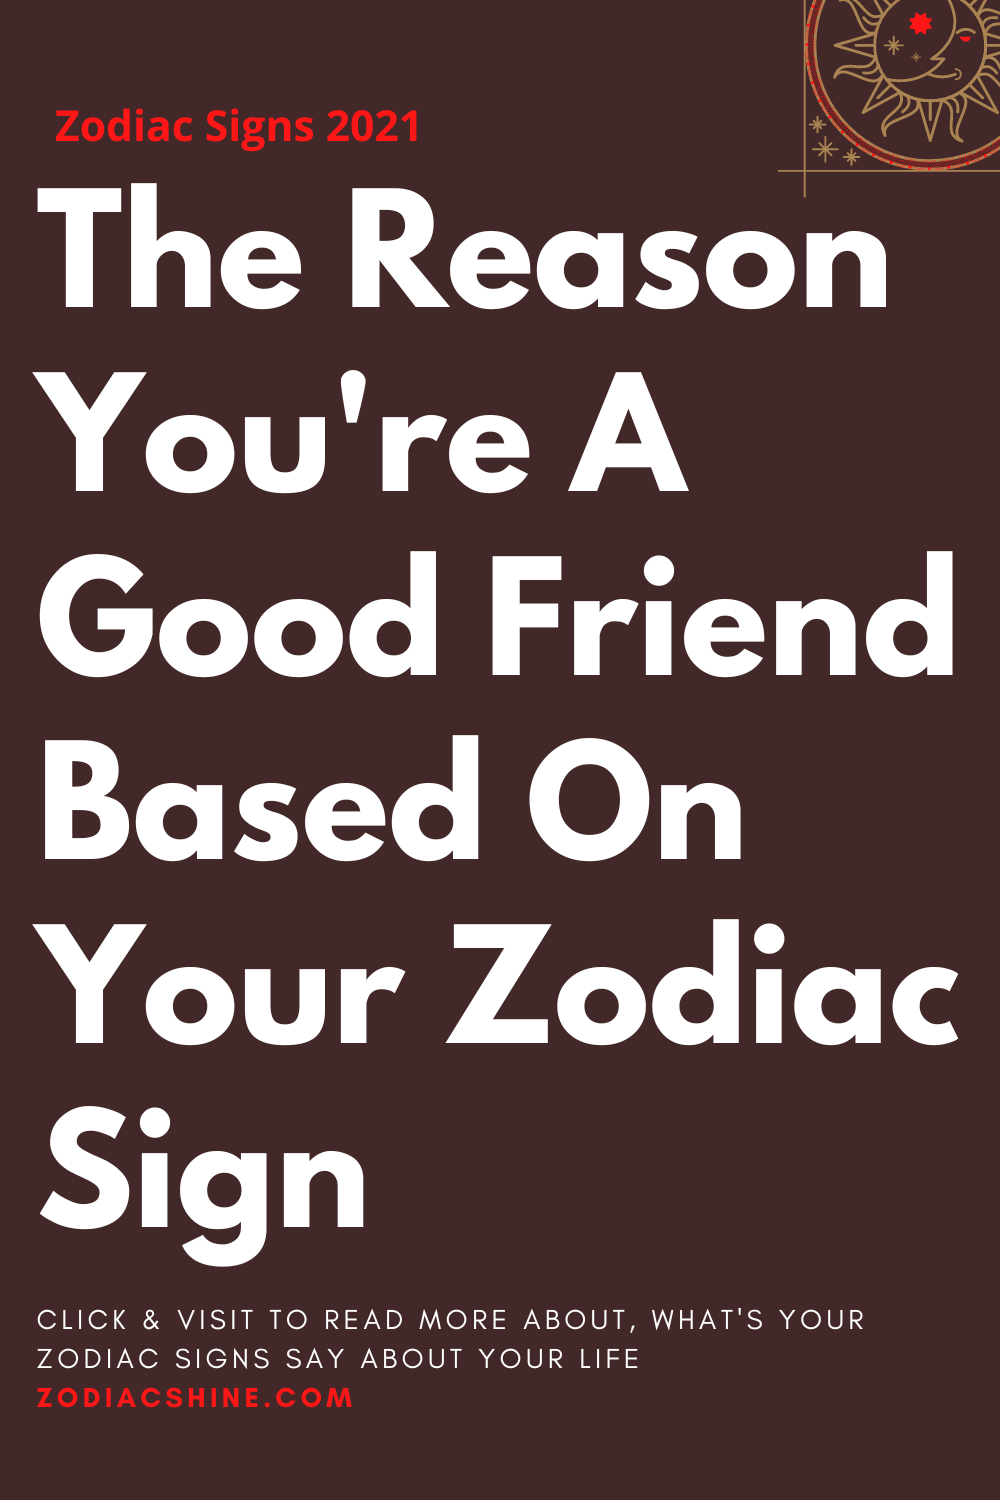 The Reason You're A Good Friend Based On Your Zodiac Sign